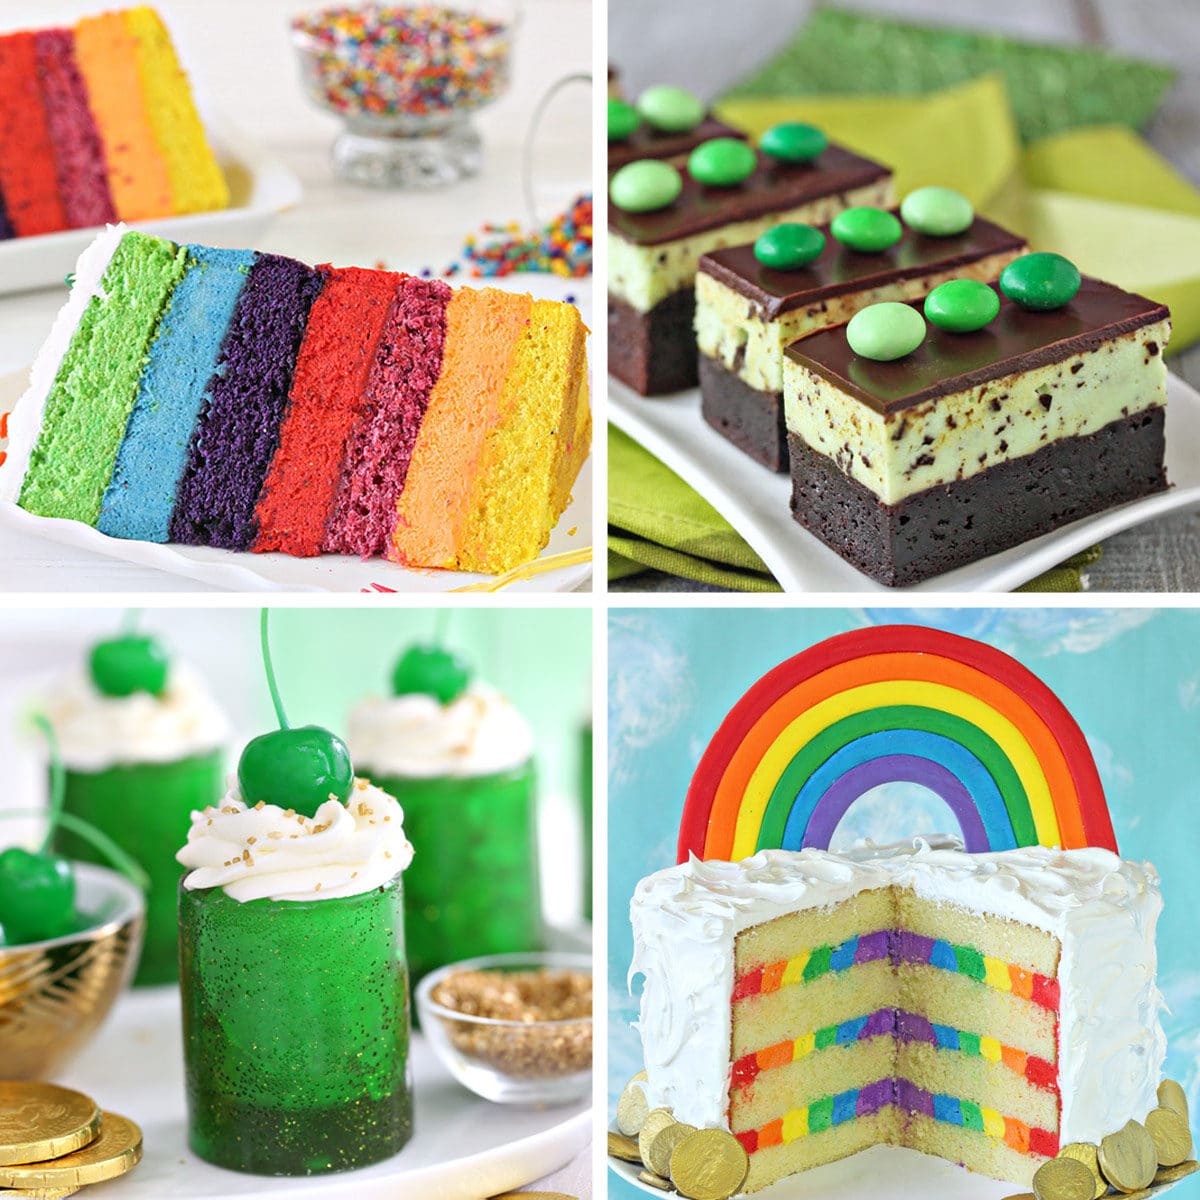 Four photo collage with rainbow and green desserts for St. Patrick's Day, with text overlay.